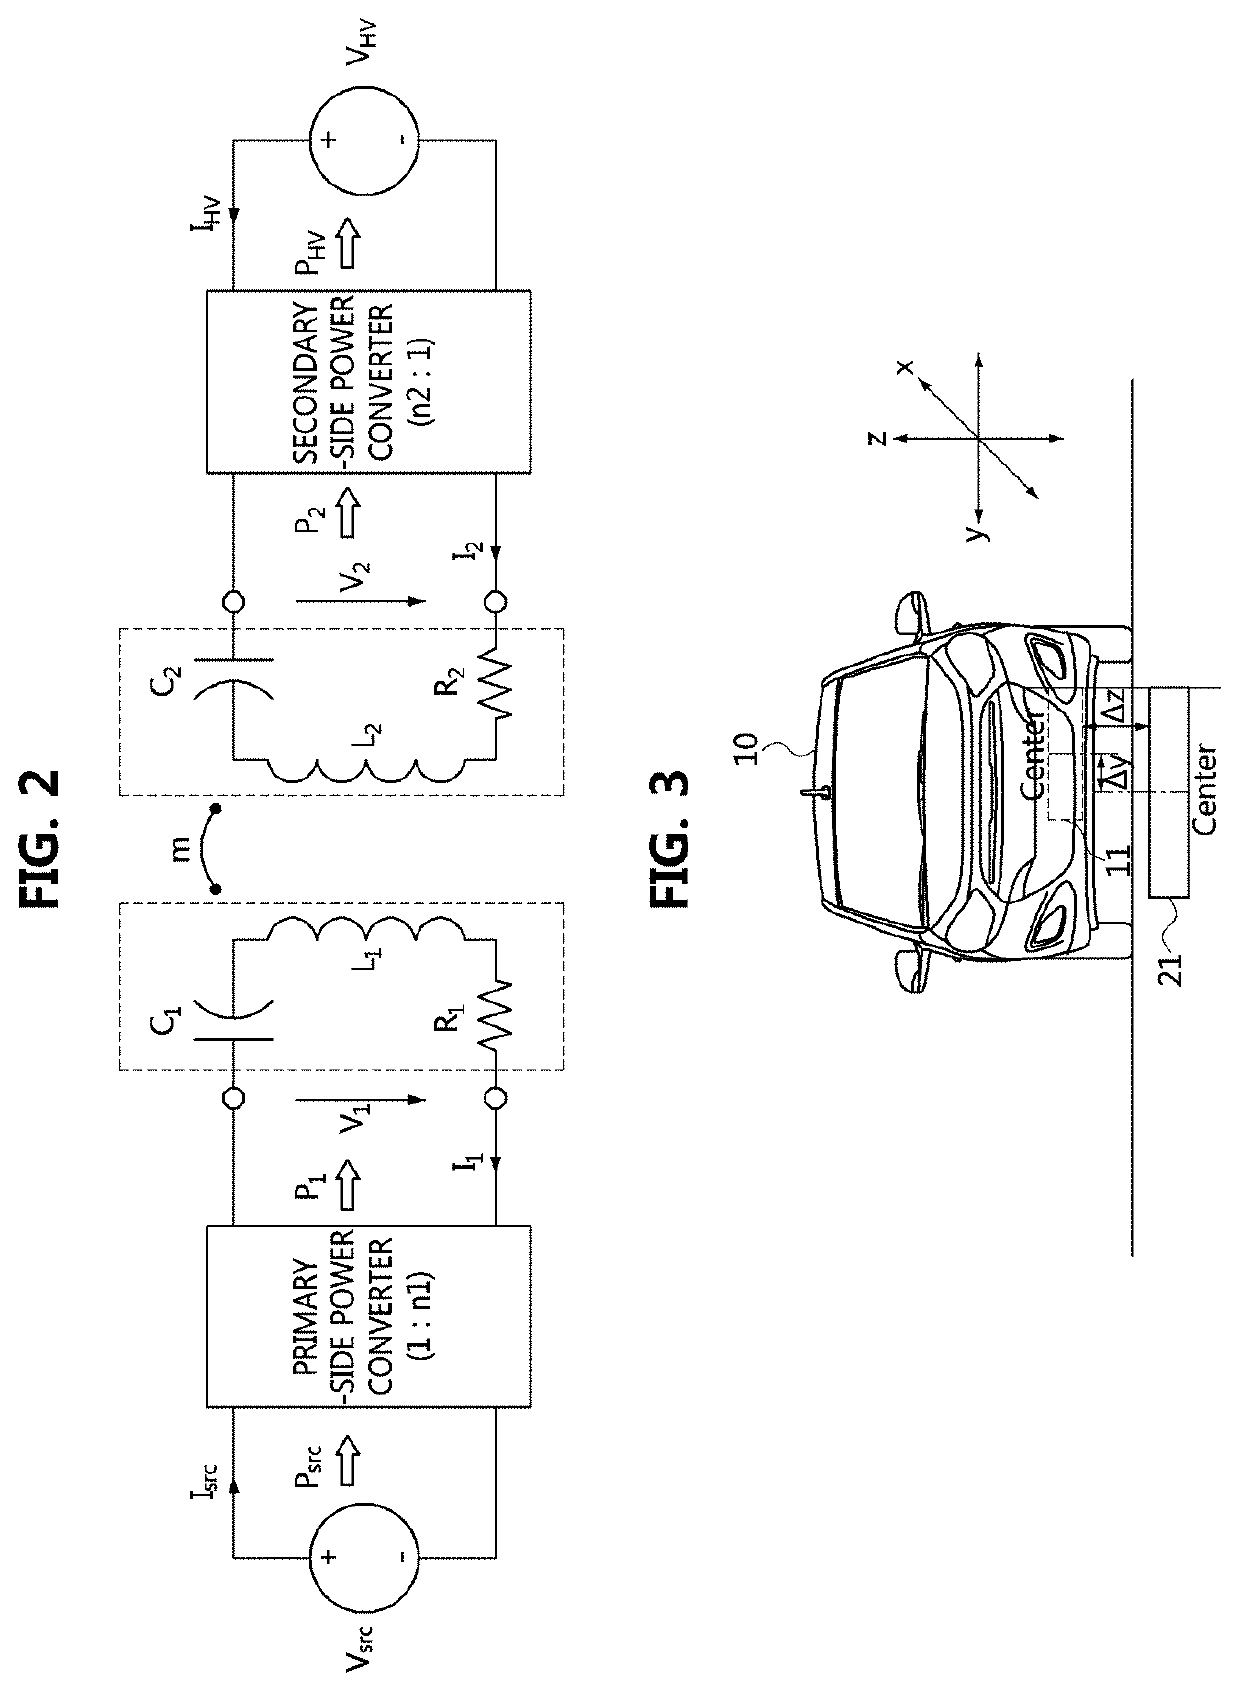 Apparatus and method for measuring vehicle position based on low frequency signals